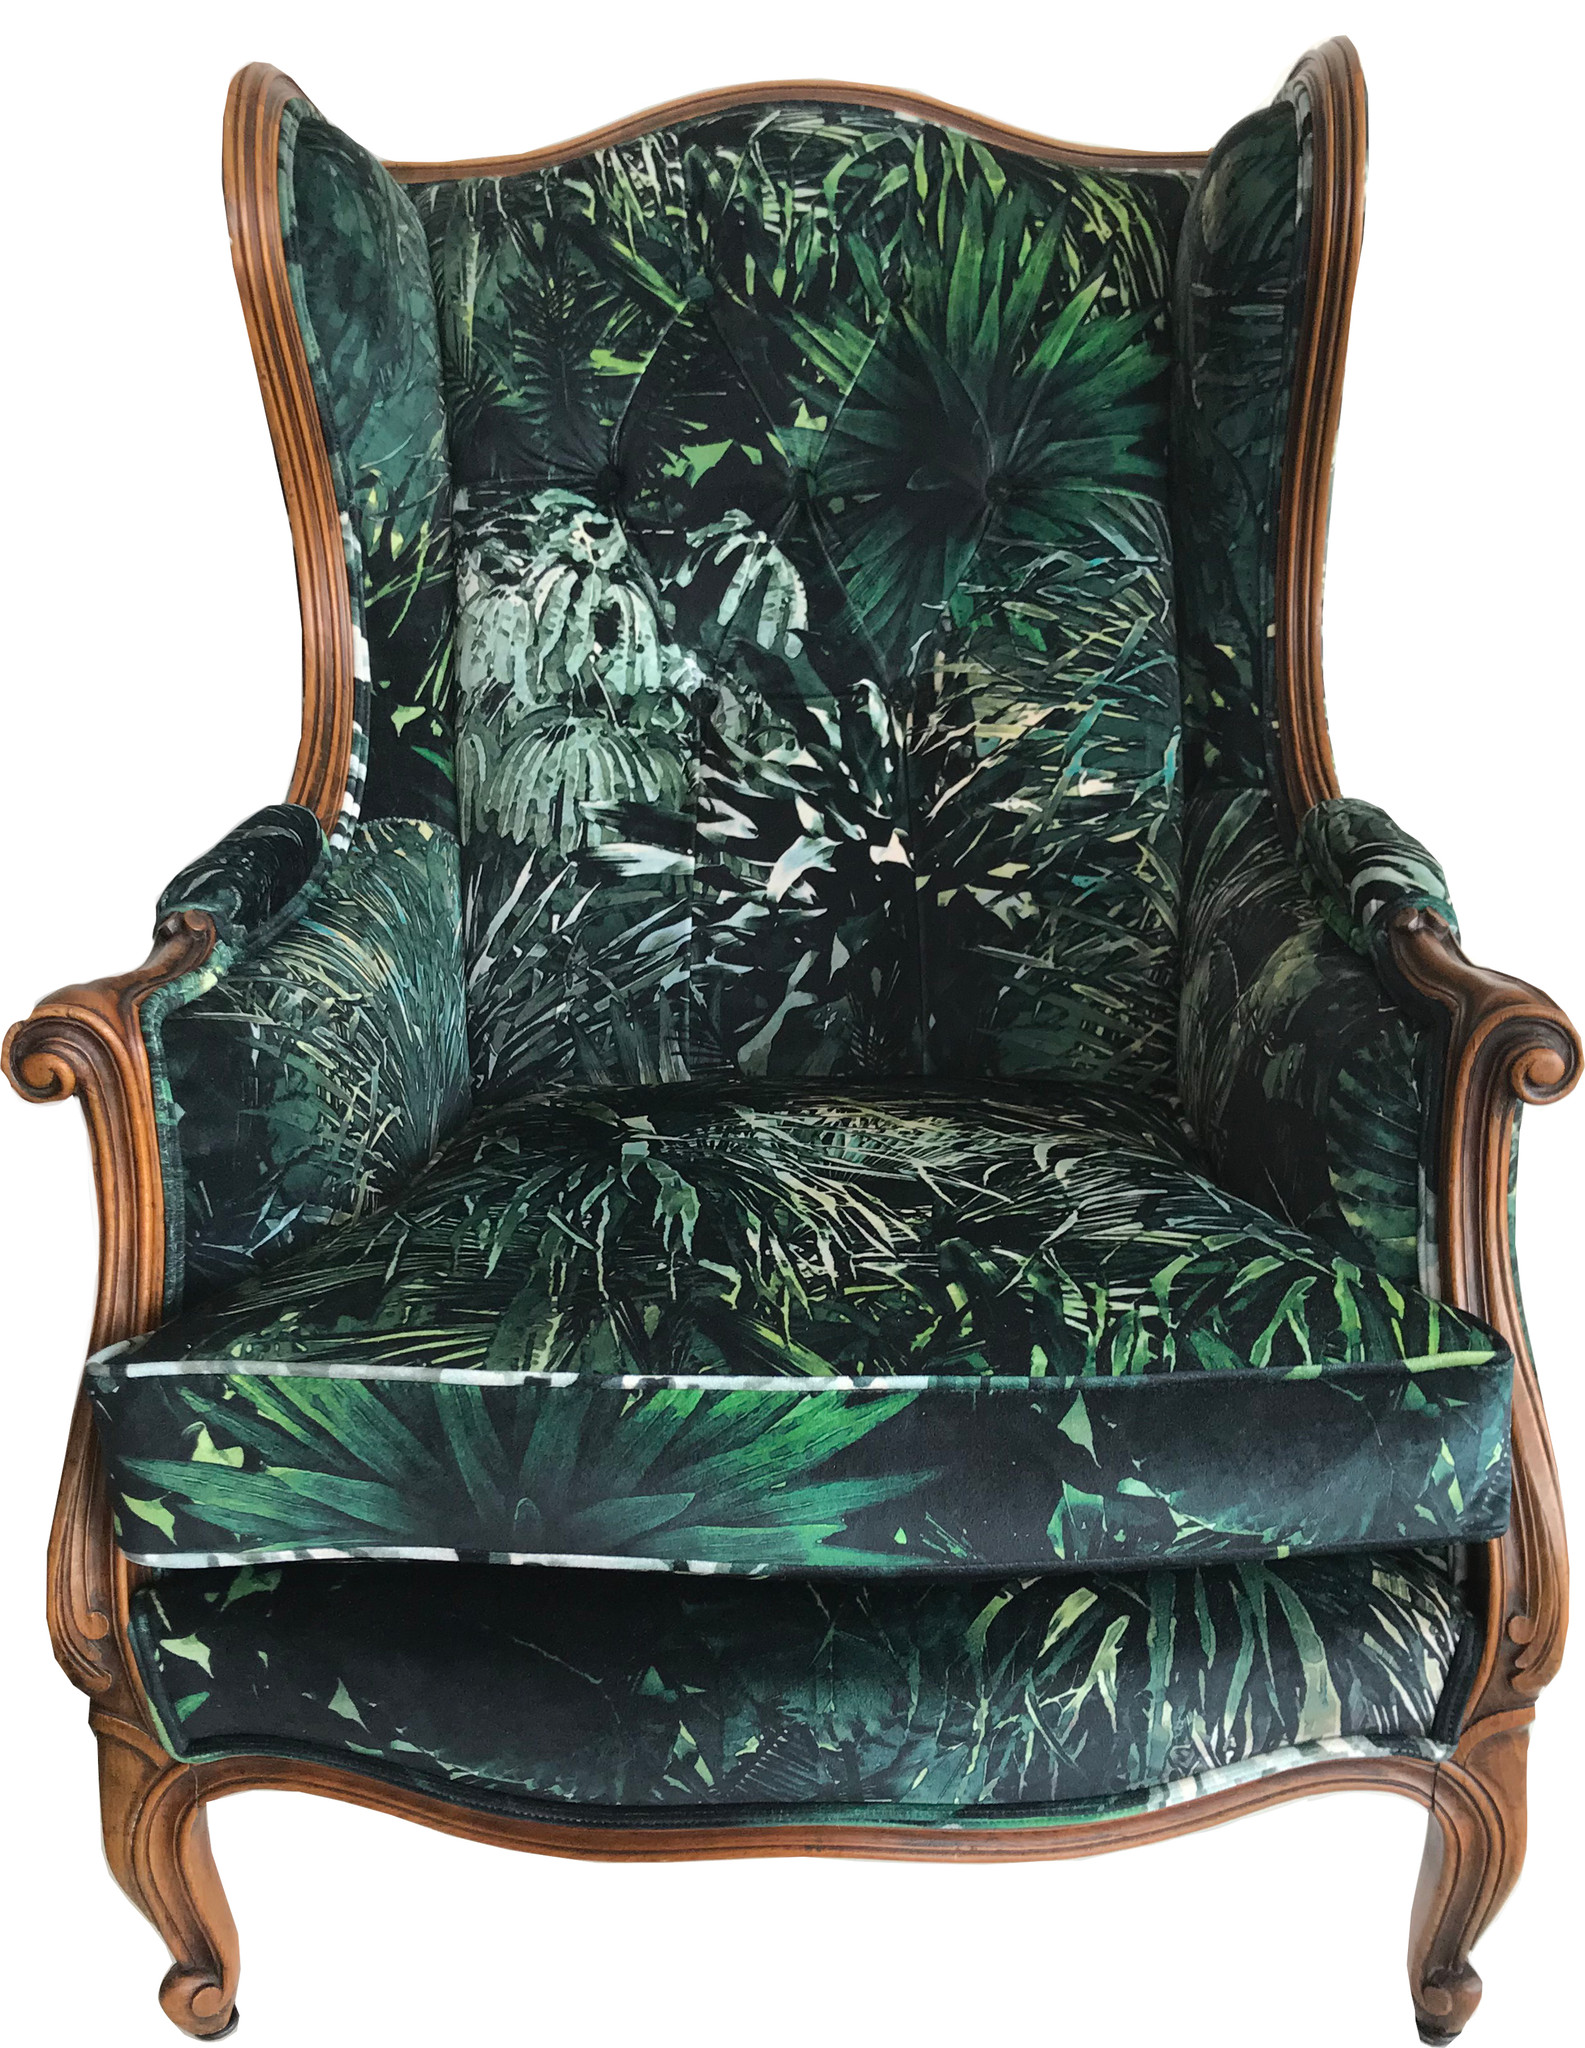 19TH CENTURY LOUIS XVI BUTTON BACK CHAIR - SPIKEY JUNGLE UPHOLSTERY (SOLD SEPARATELY OR AS A PAIR)